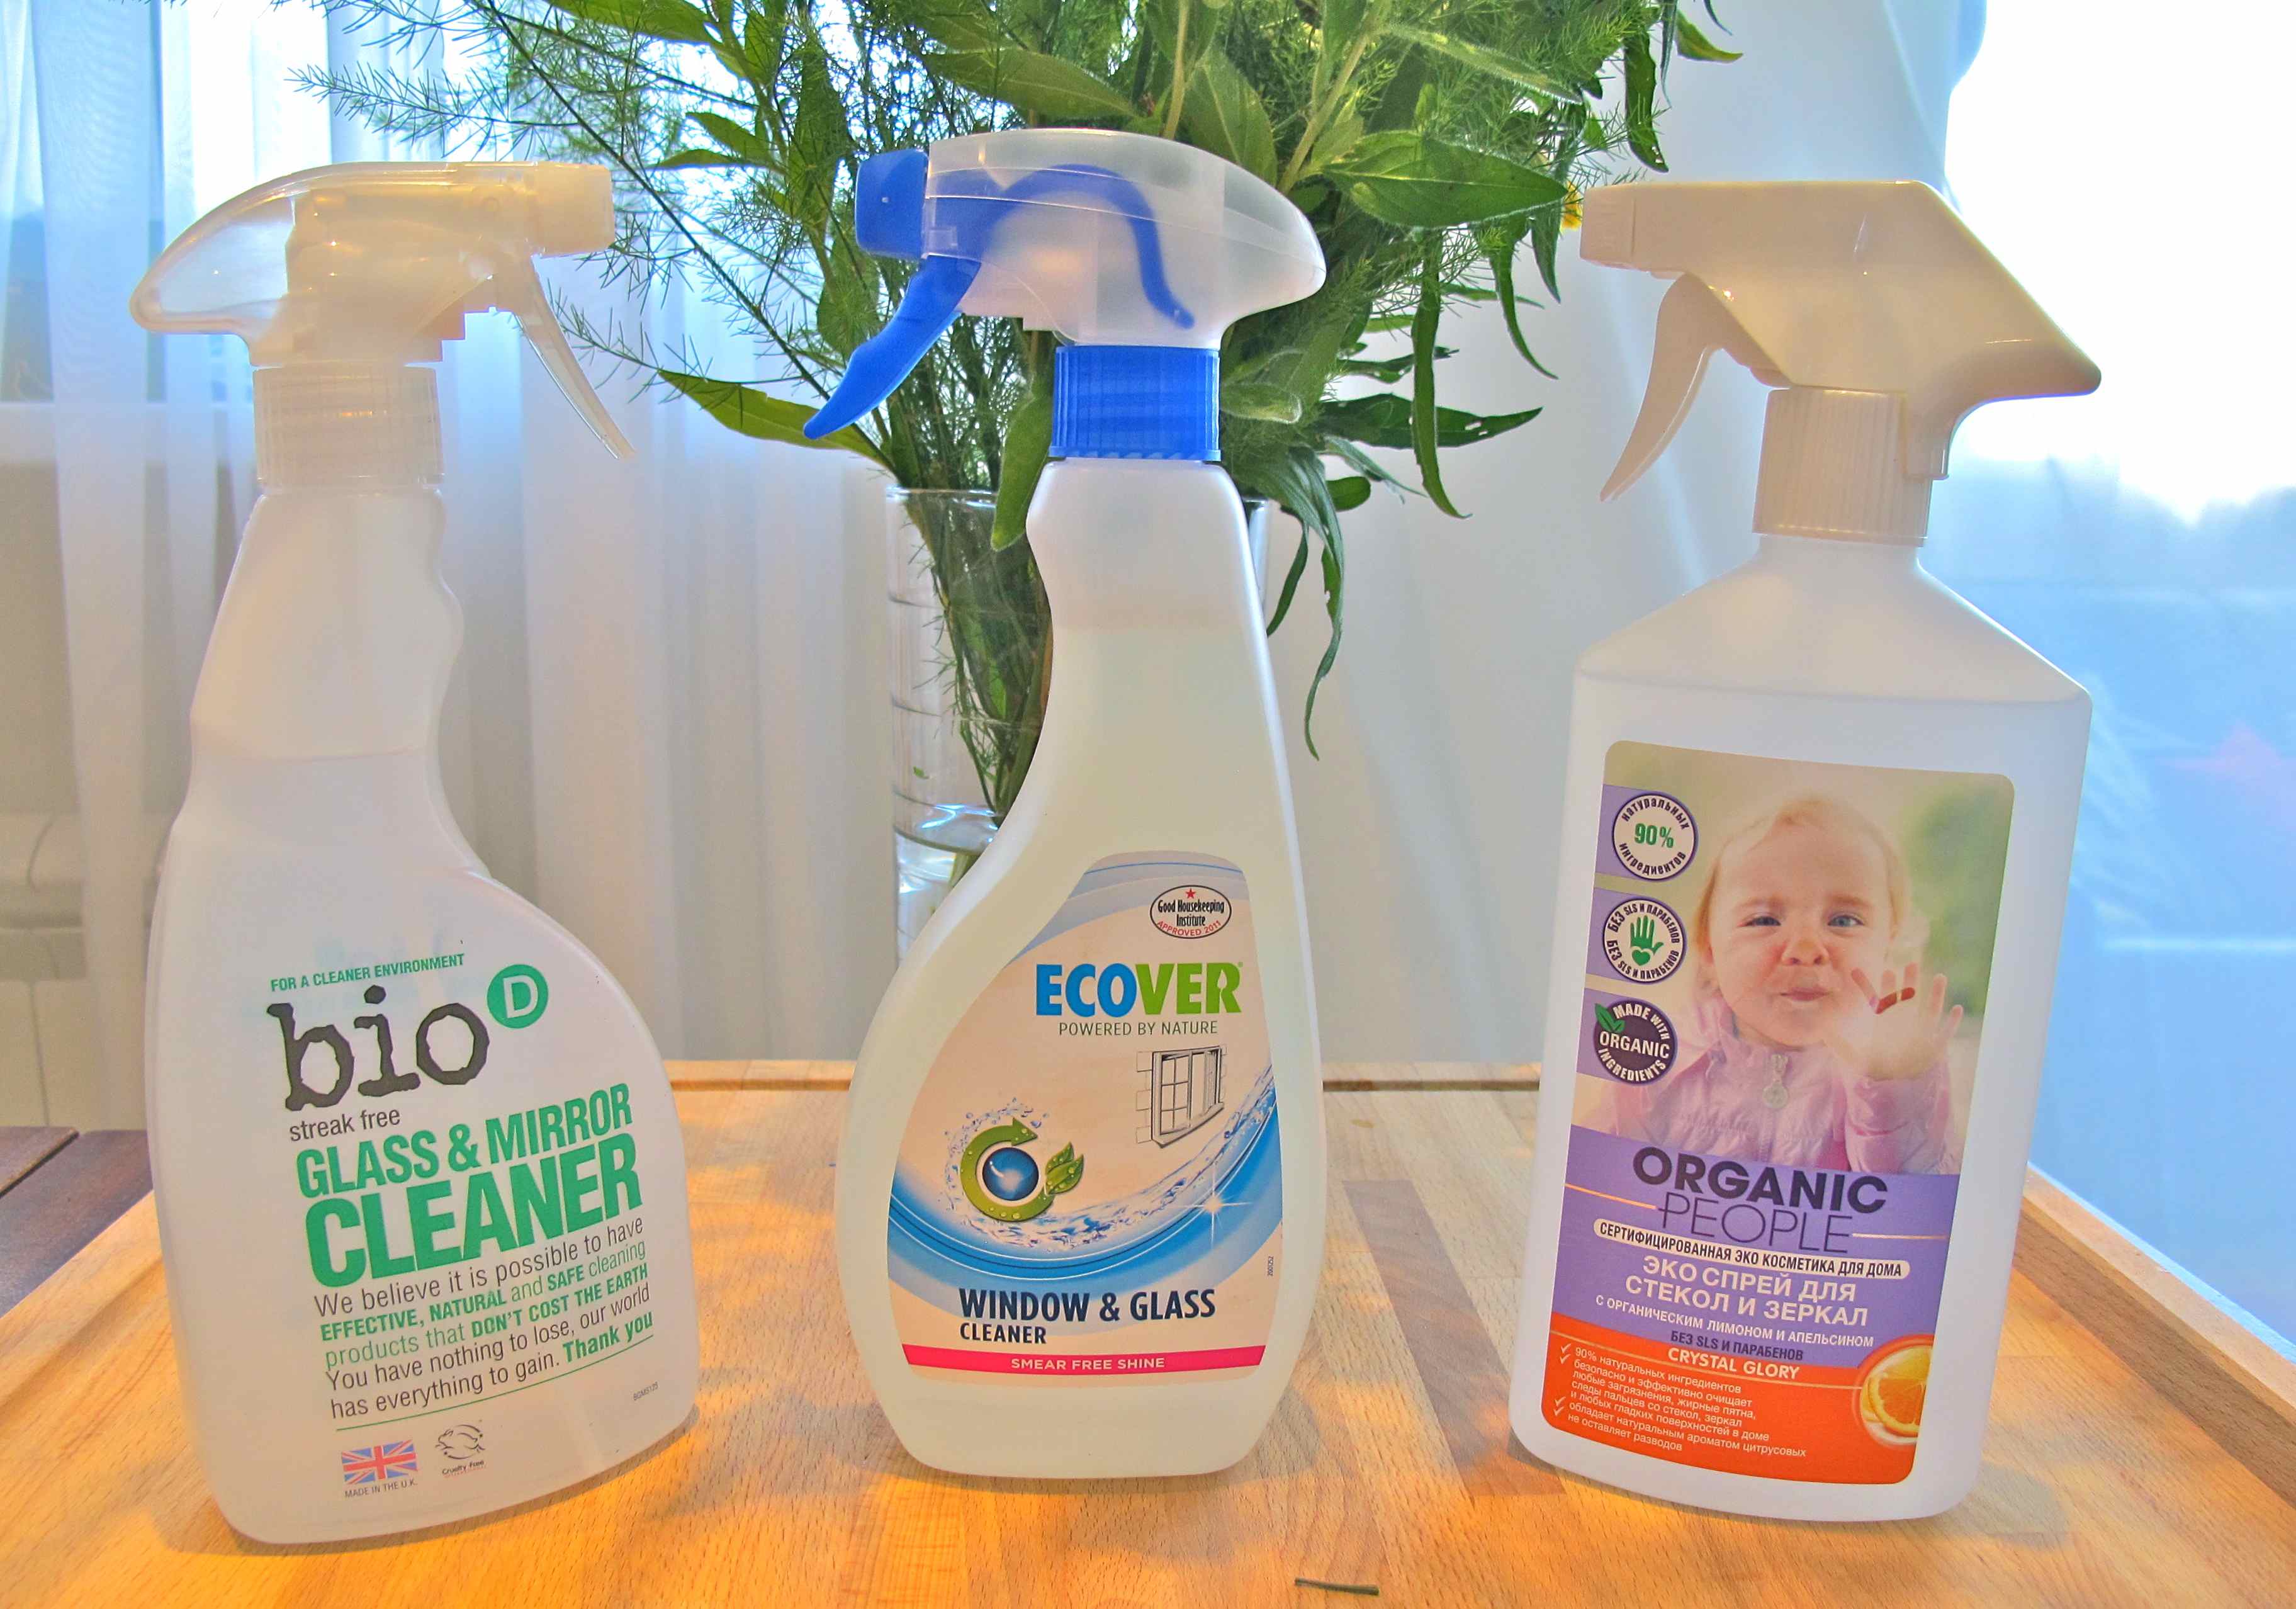 Glass and mirror cleaners Ecover Bio-D Organic People 2